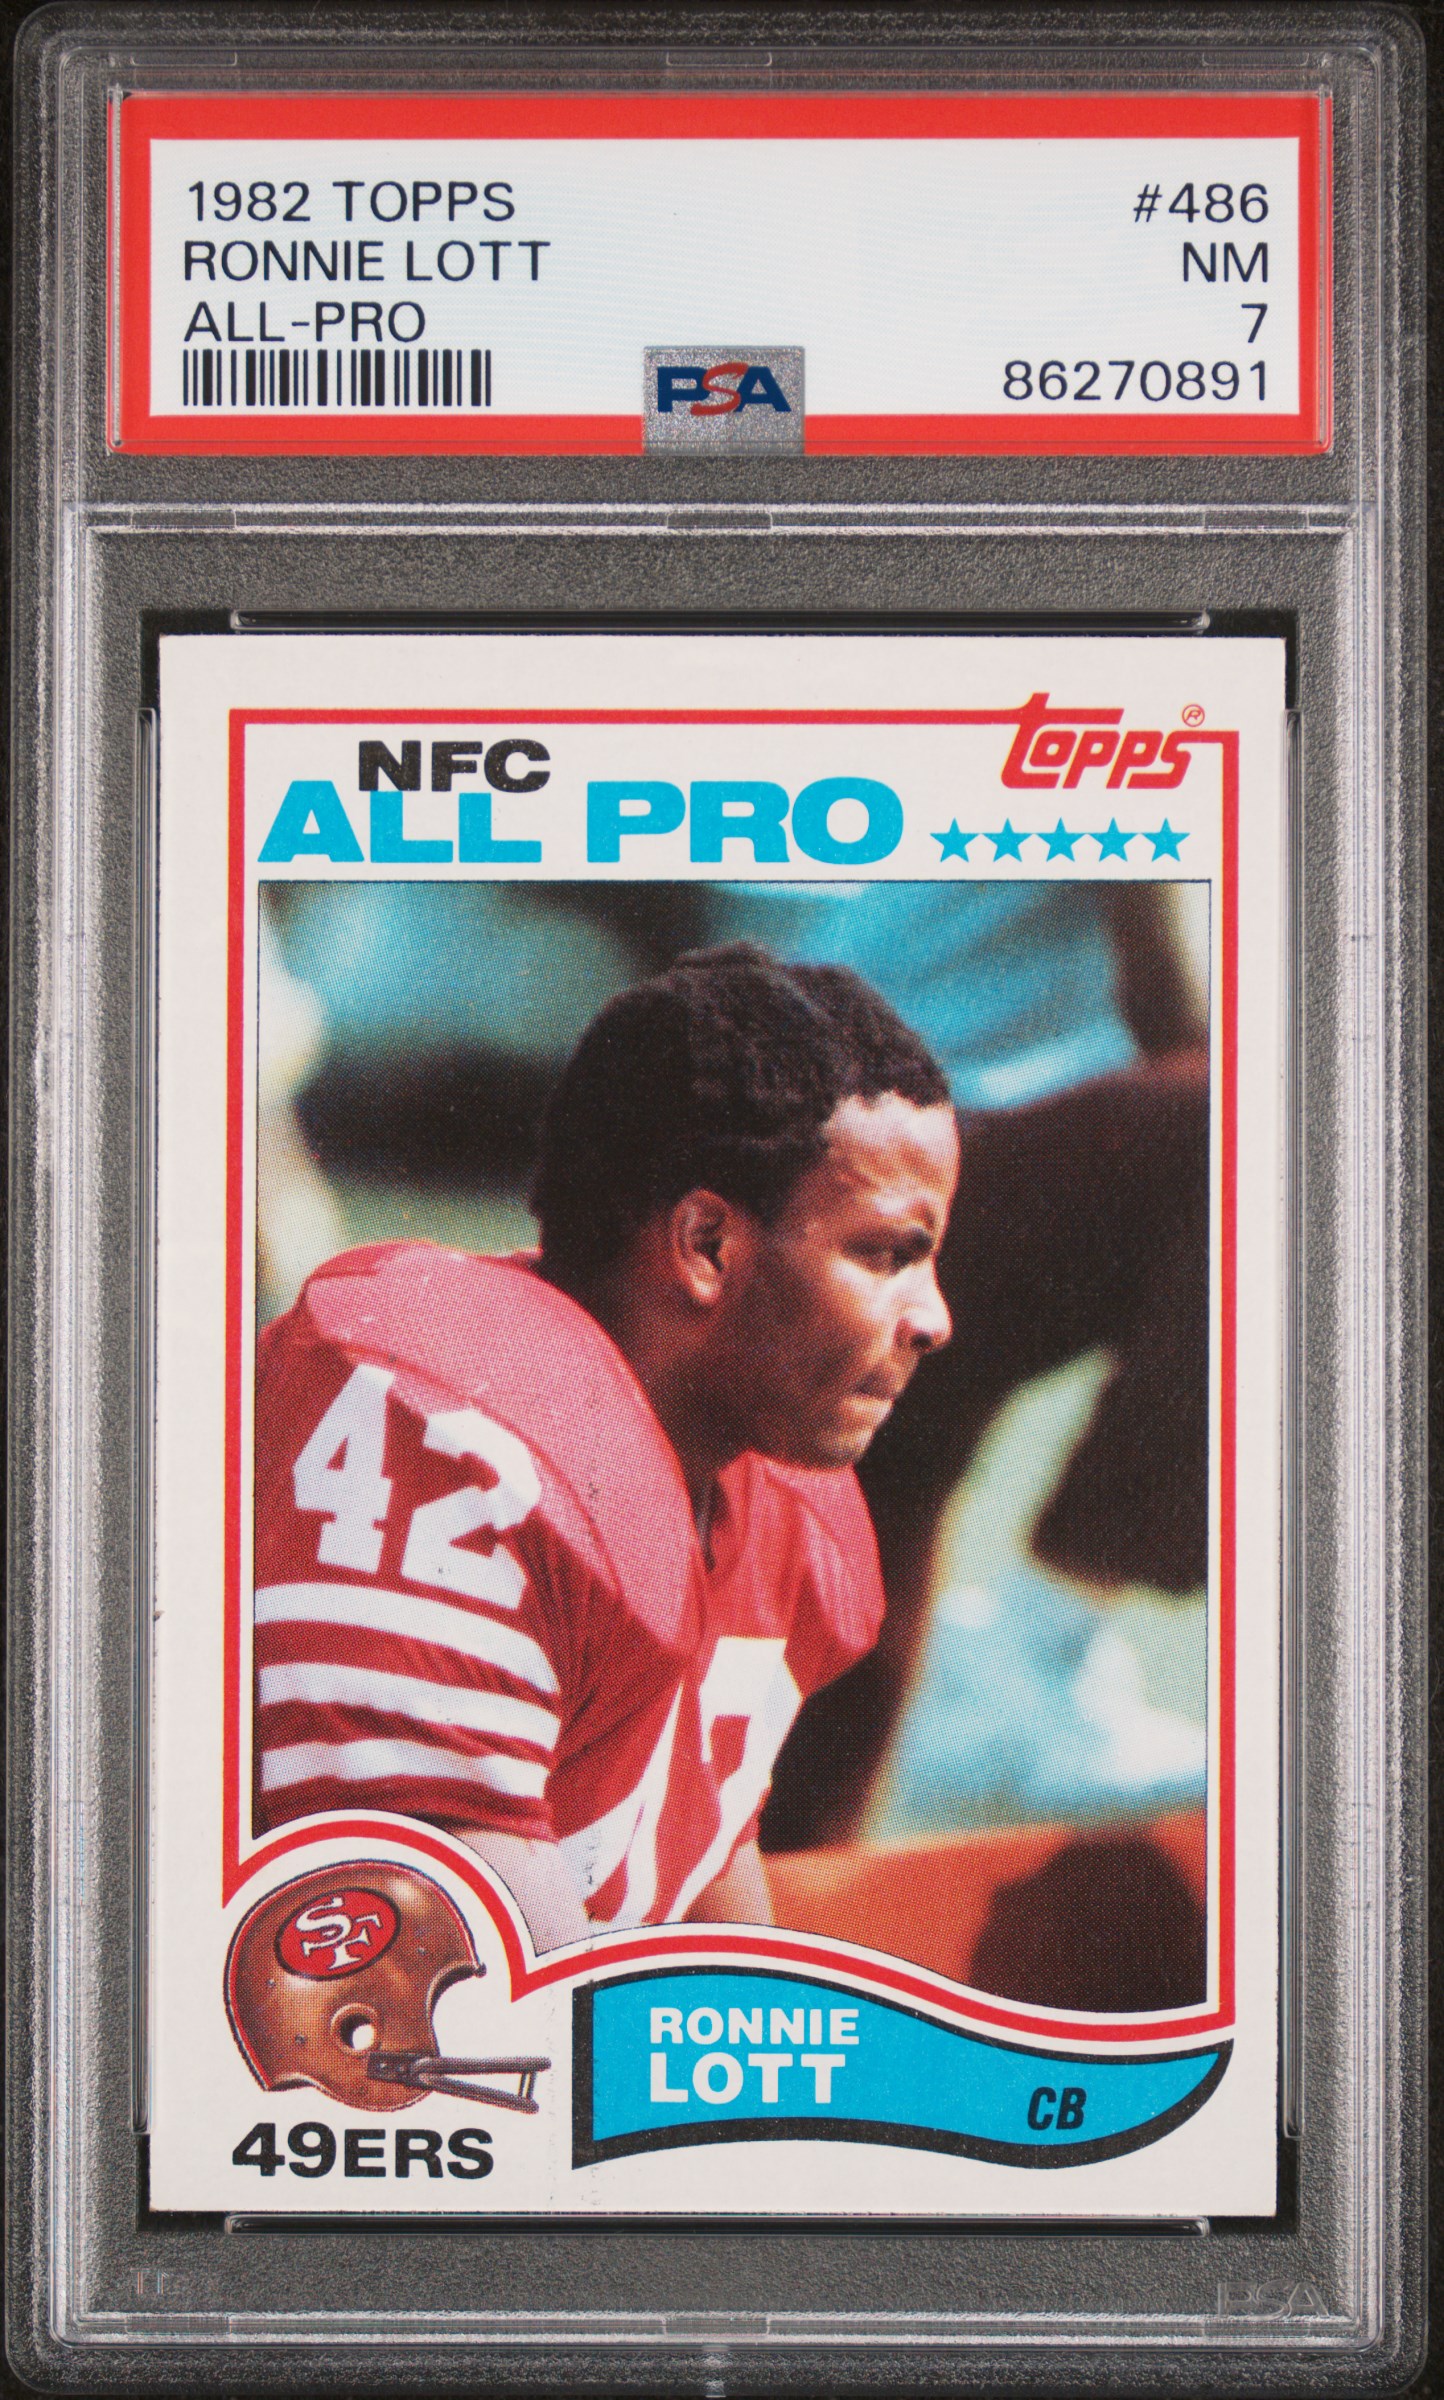 1982 Topps All-Pro #486 Ronnie Lott Rookie Card – PSA NM 7